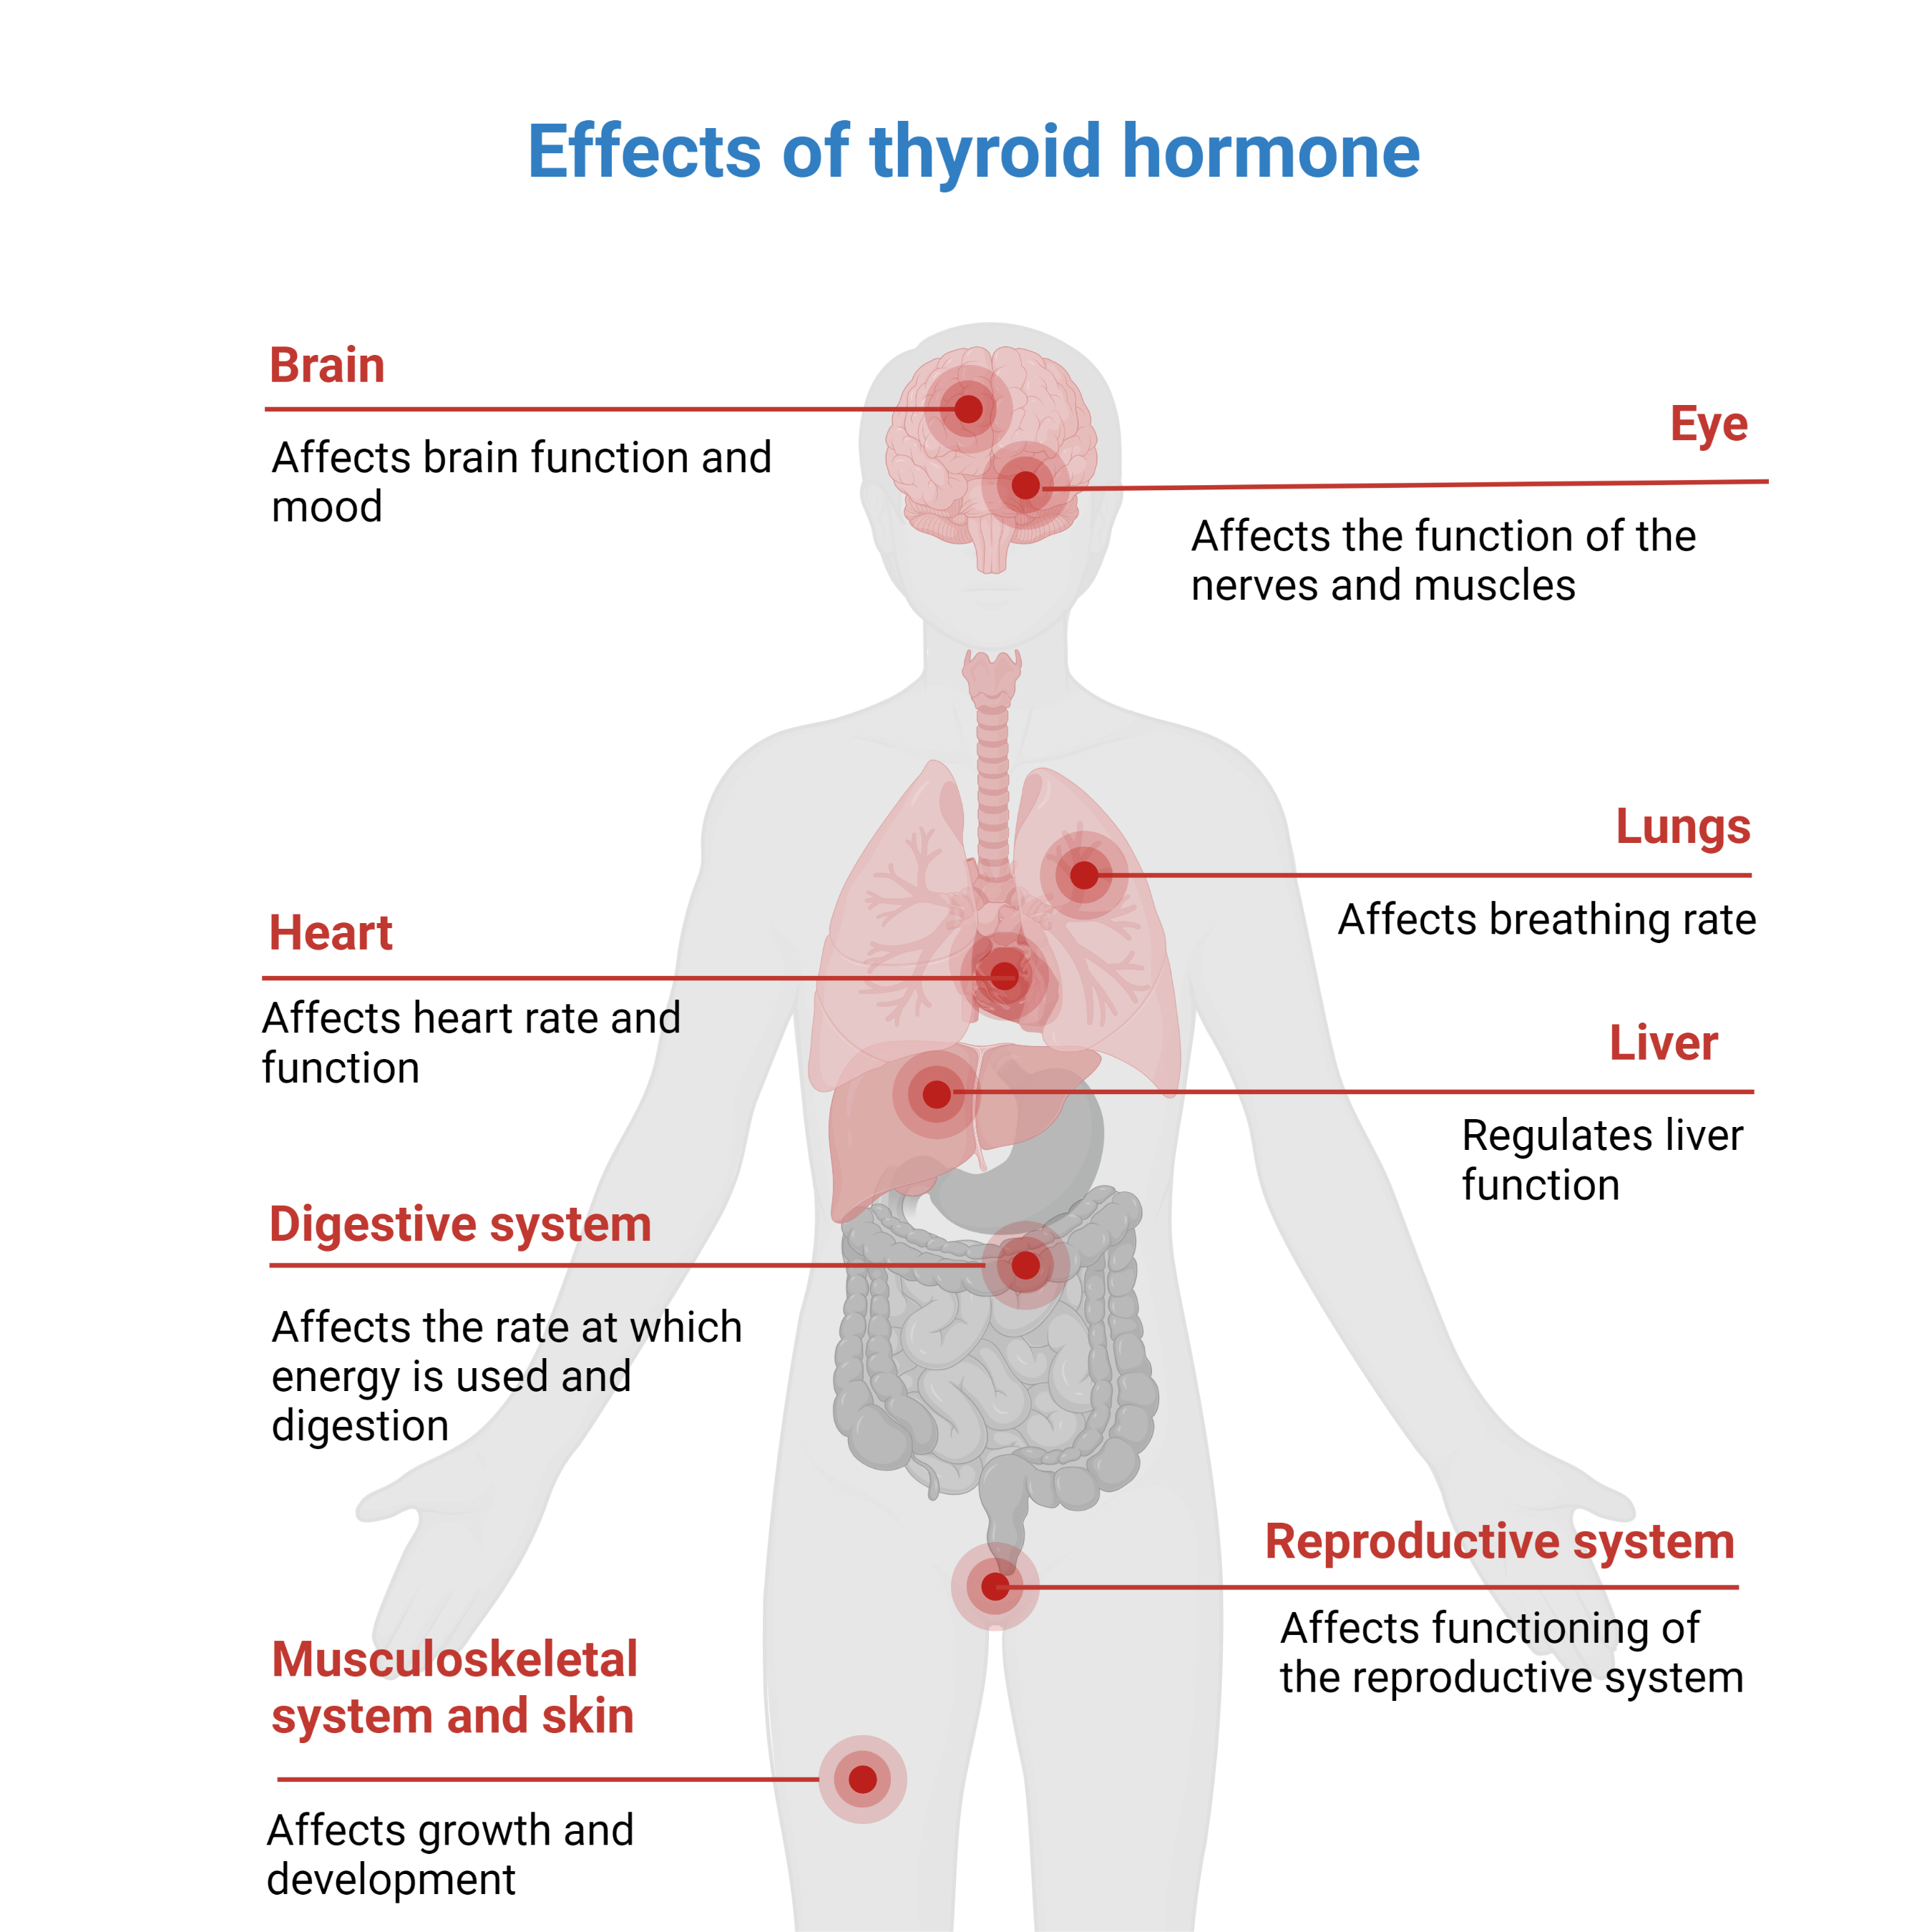 Diagram showing the effects of the thyroid hormone on various organs. Image created using Biorender.